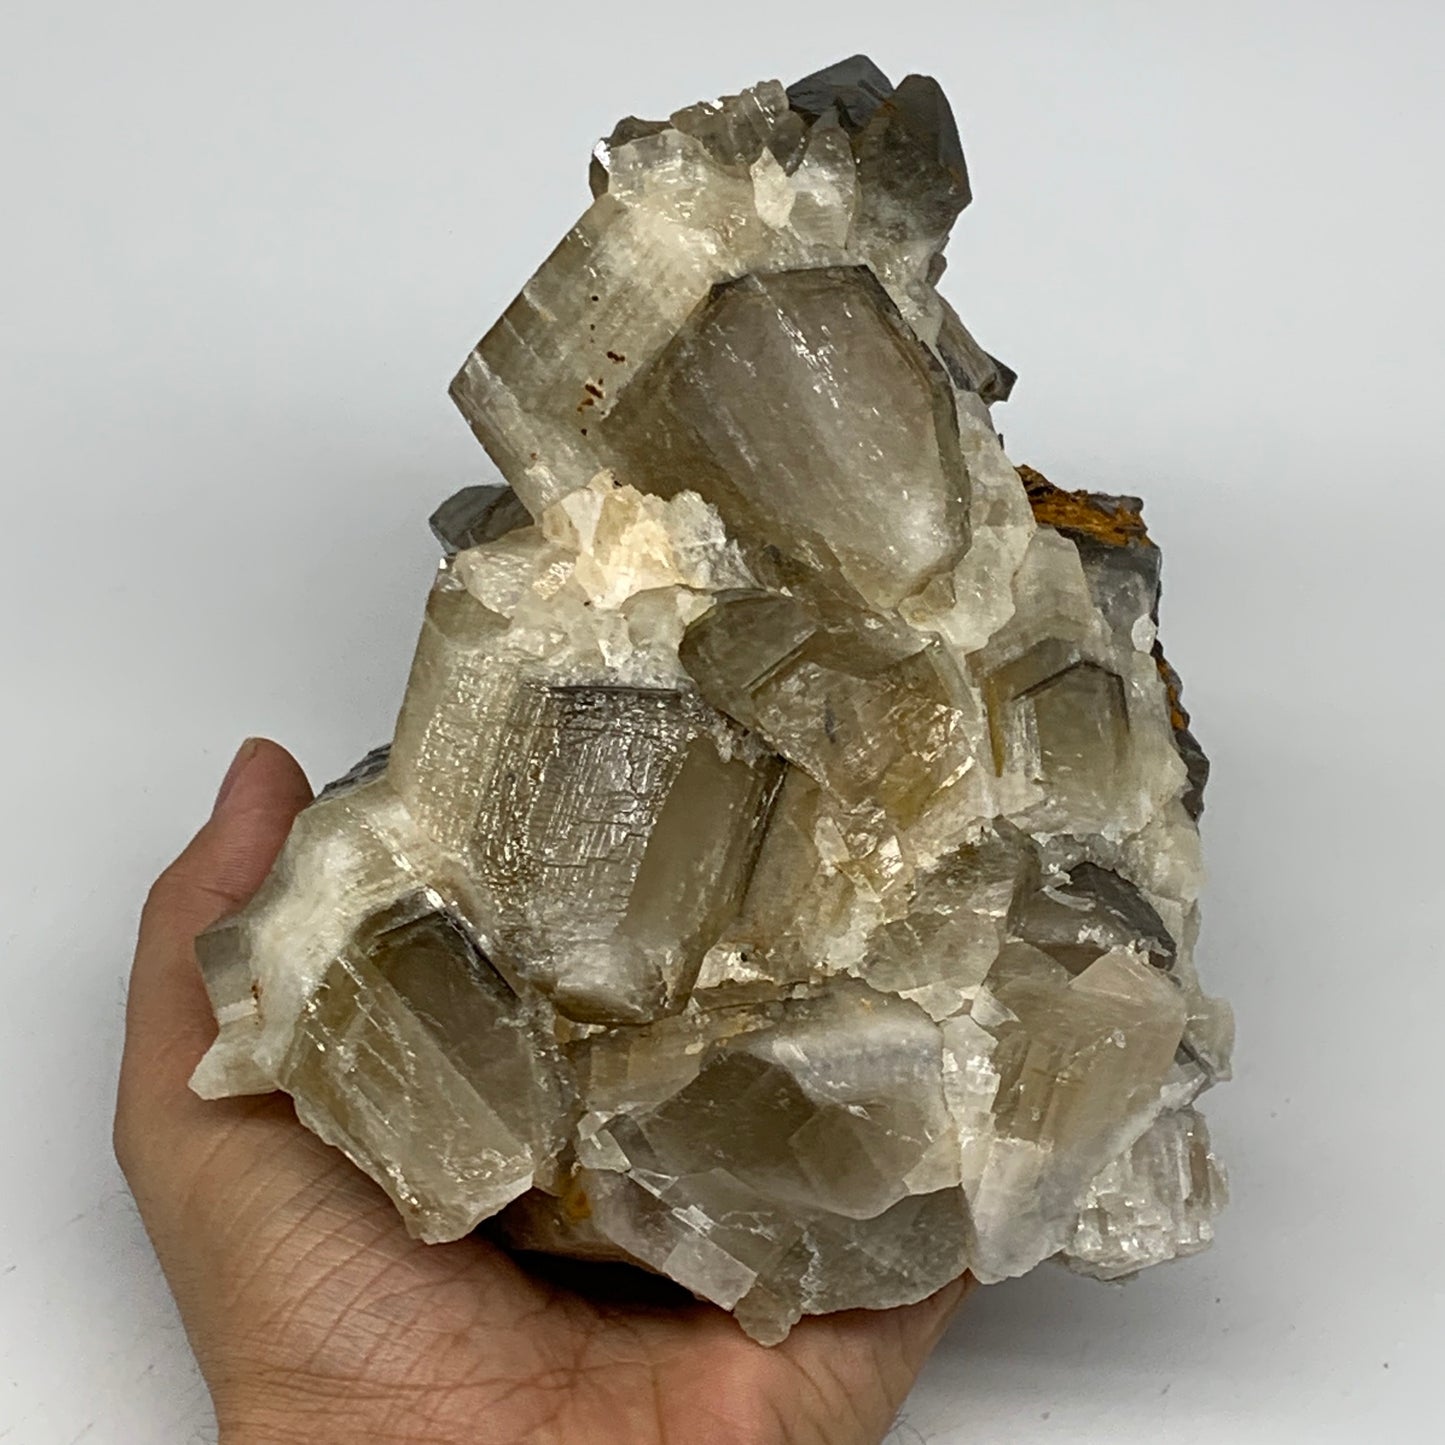 1680g, 6.1"x5"x4.4", Natural Brown Calcite Mineral Specimens @Morocco, B11129